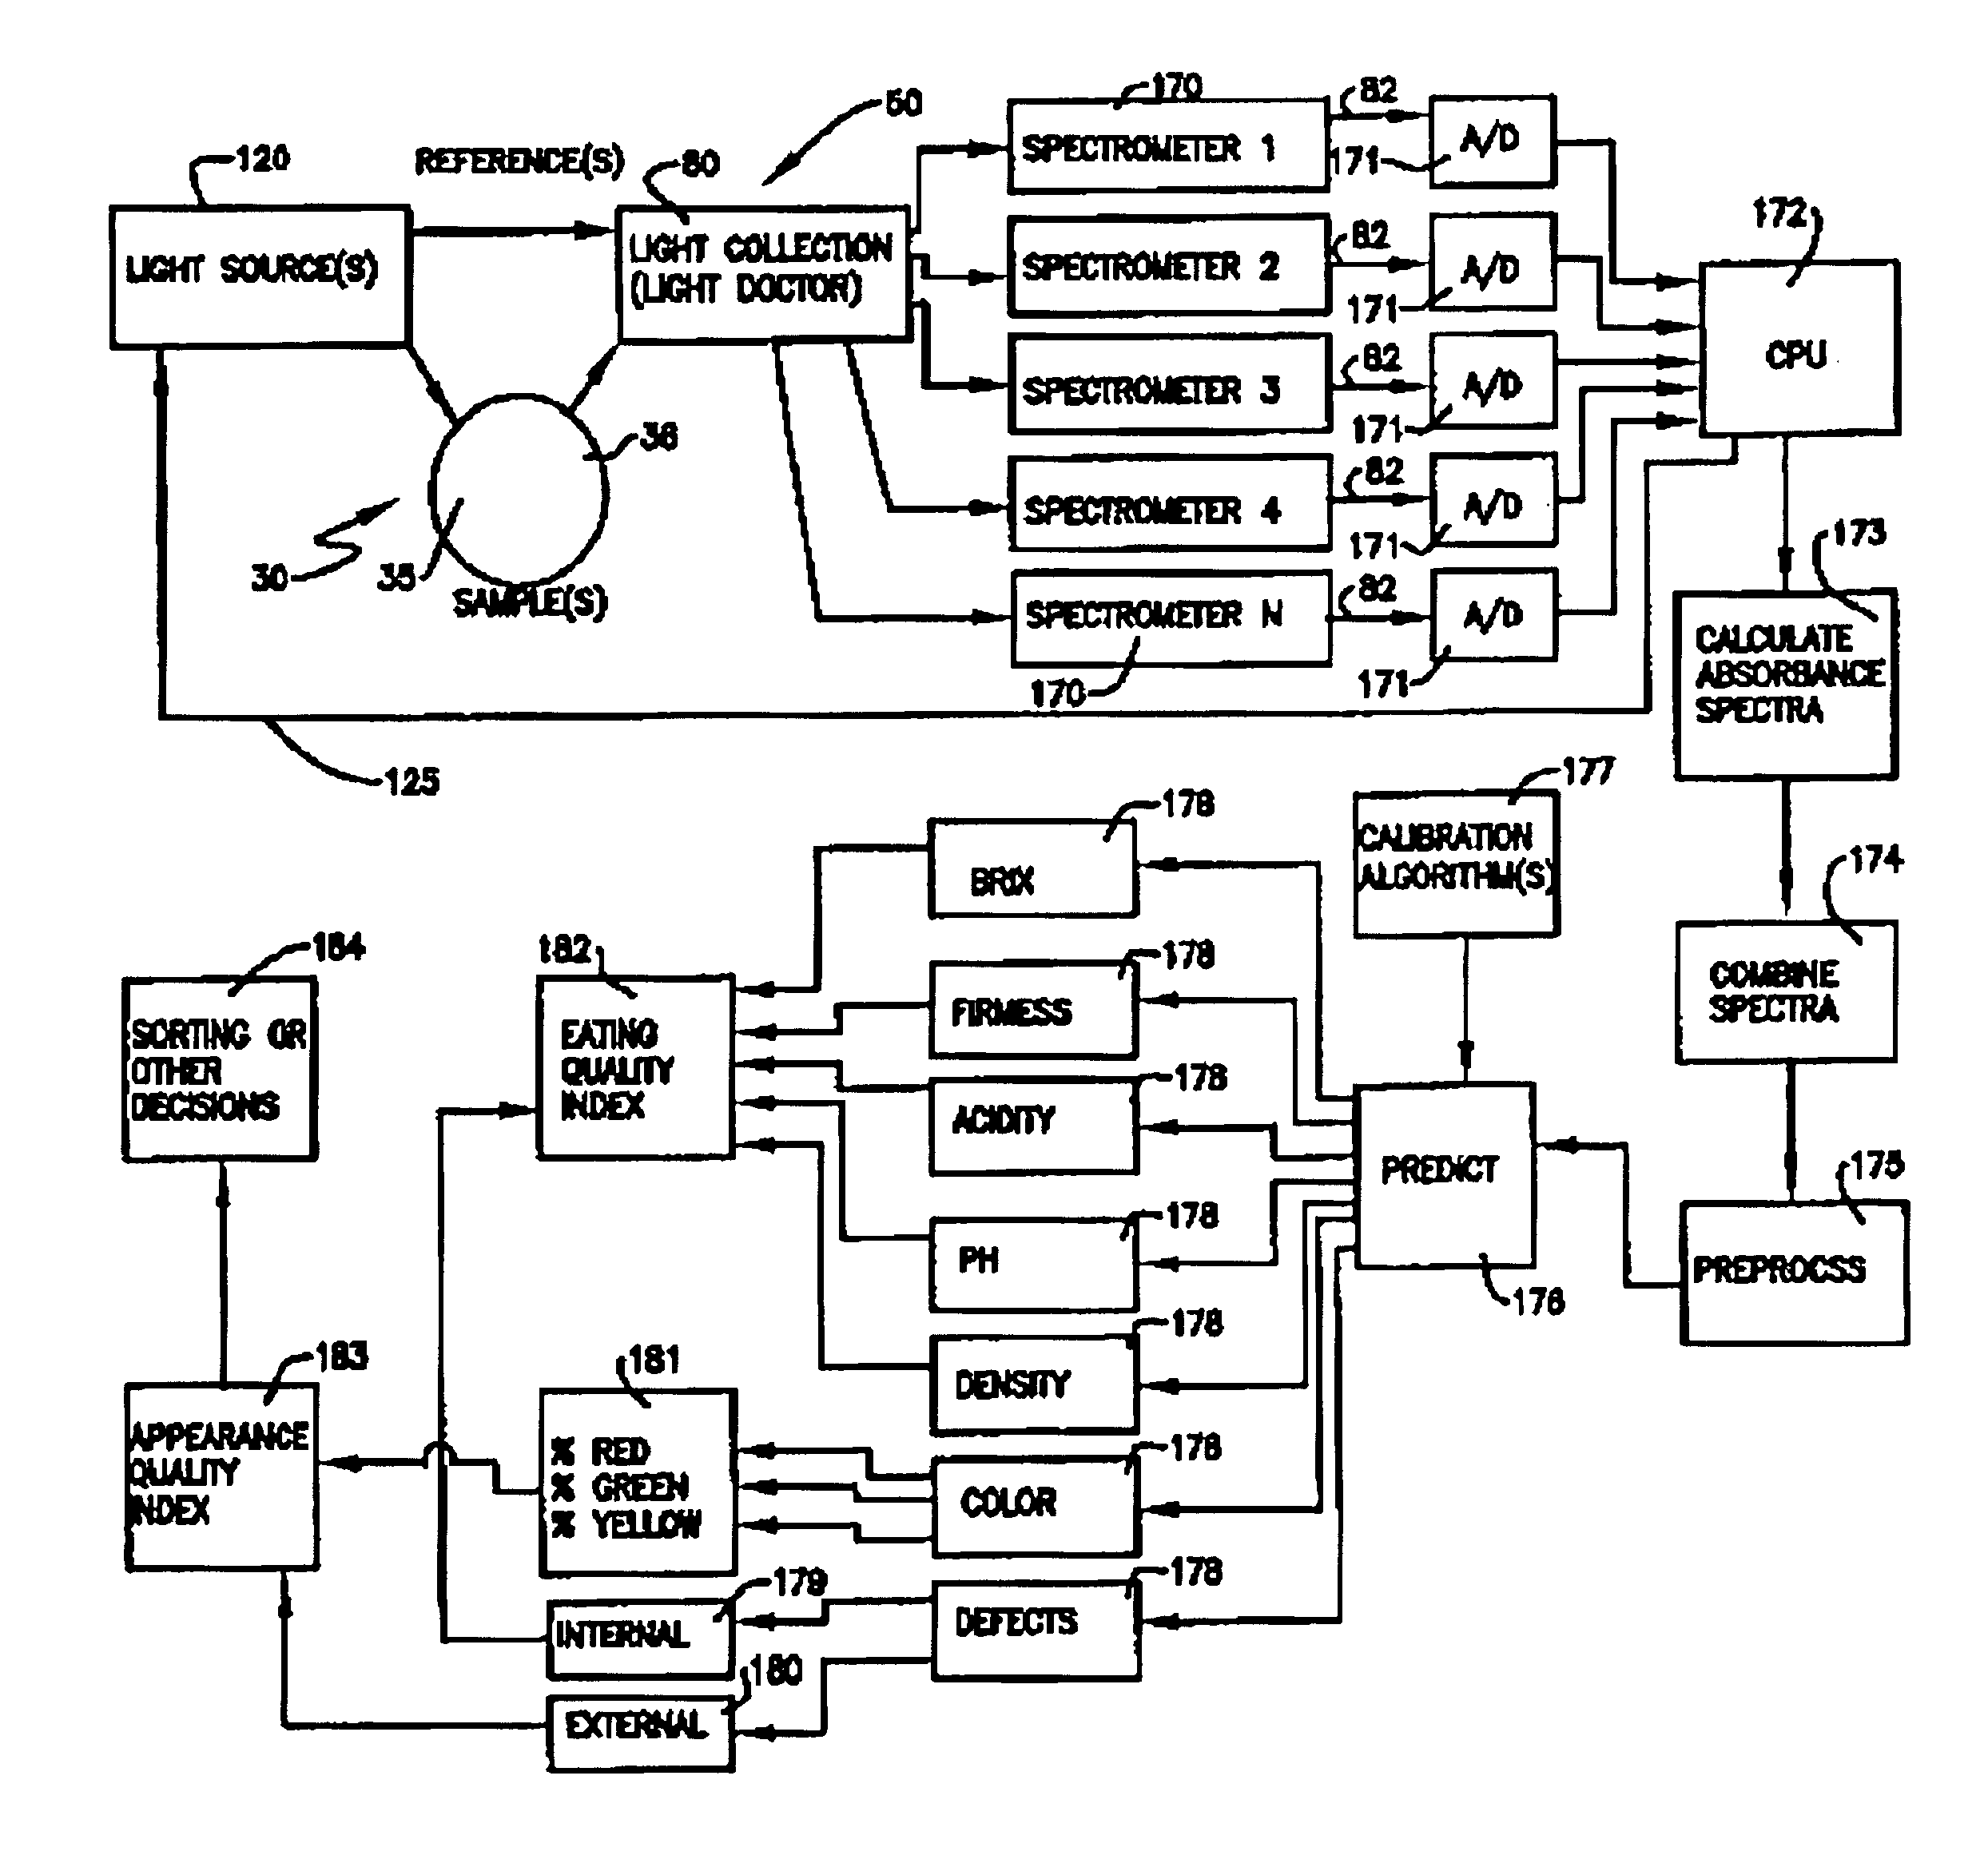 Apparatus and method and techniques for measuring and correlating characteristics of fruit with visible/near infra-red spectrum